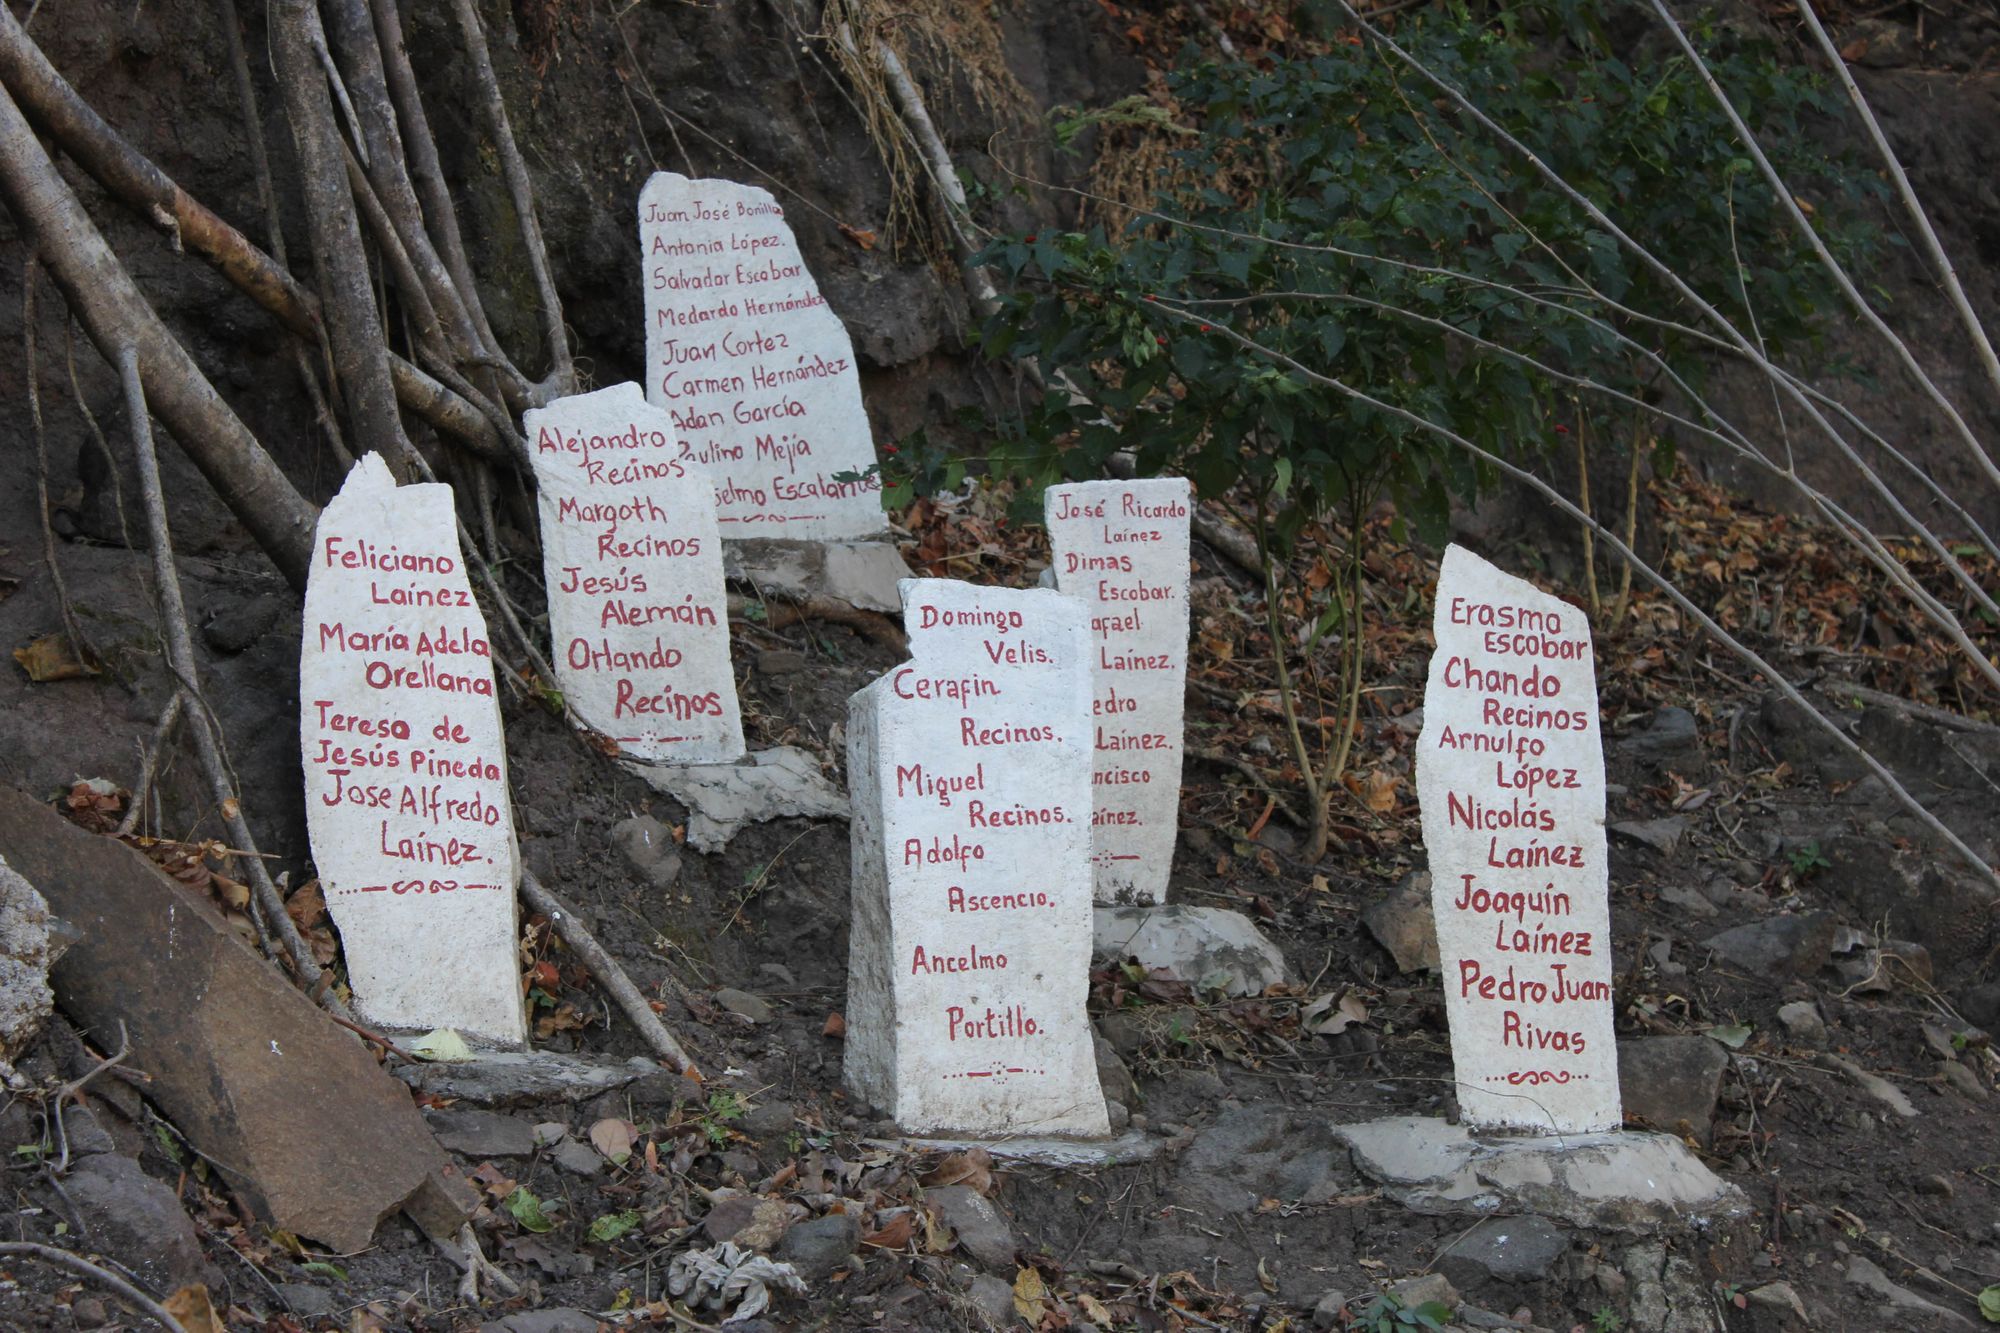 Remembering the Río Lempa Massacre of March 18, 1981